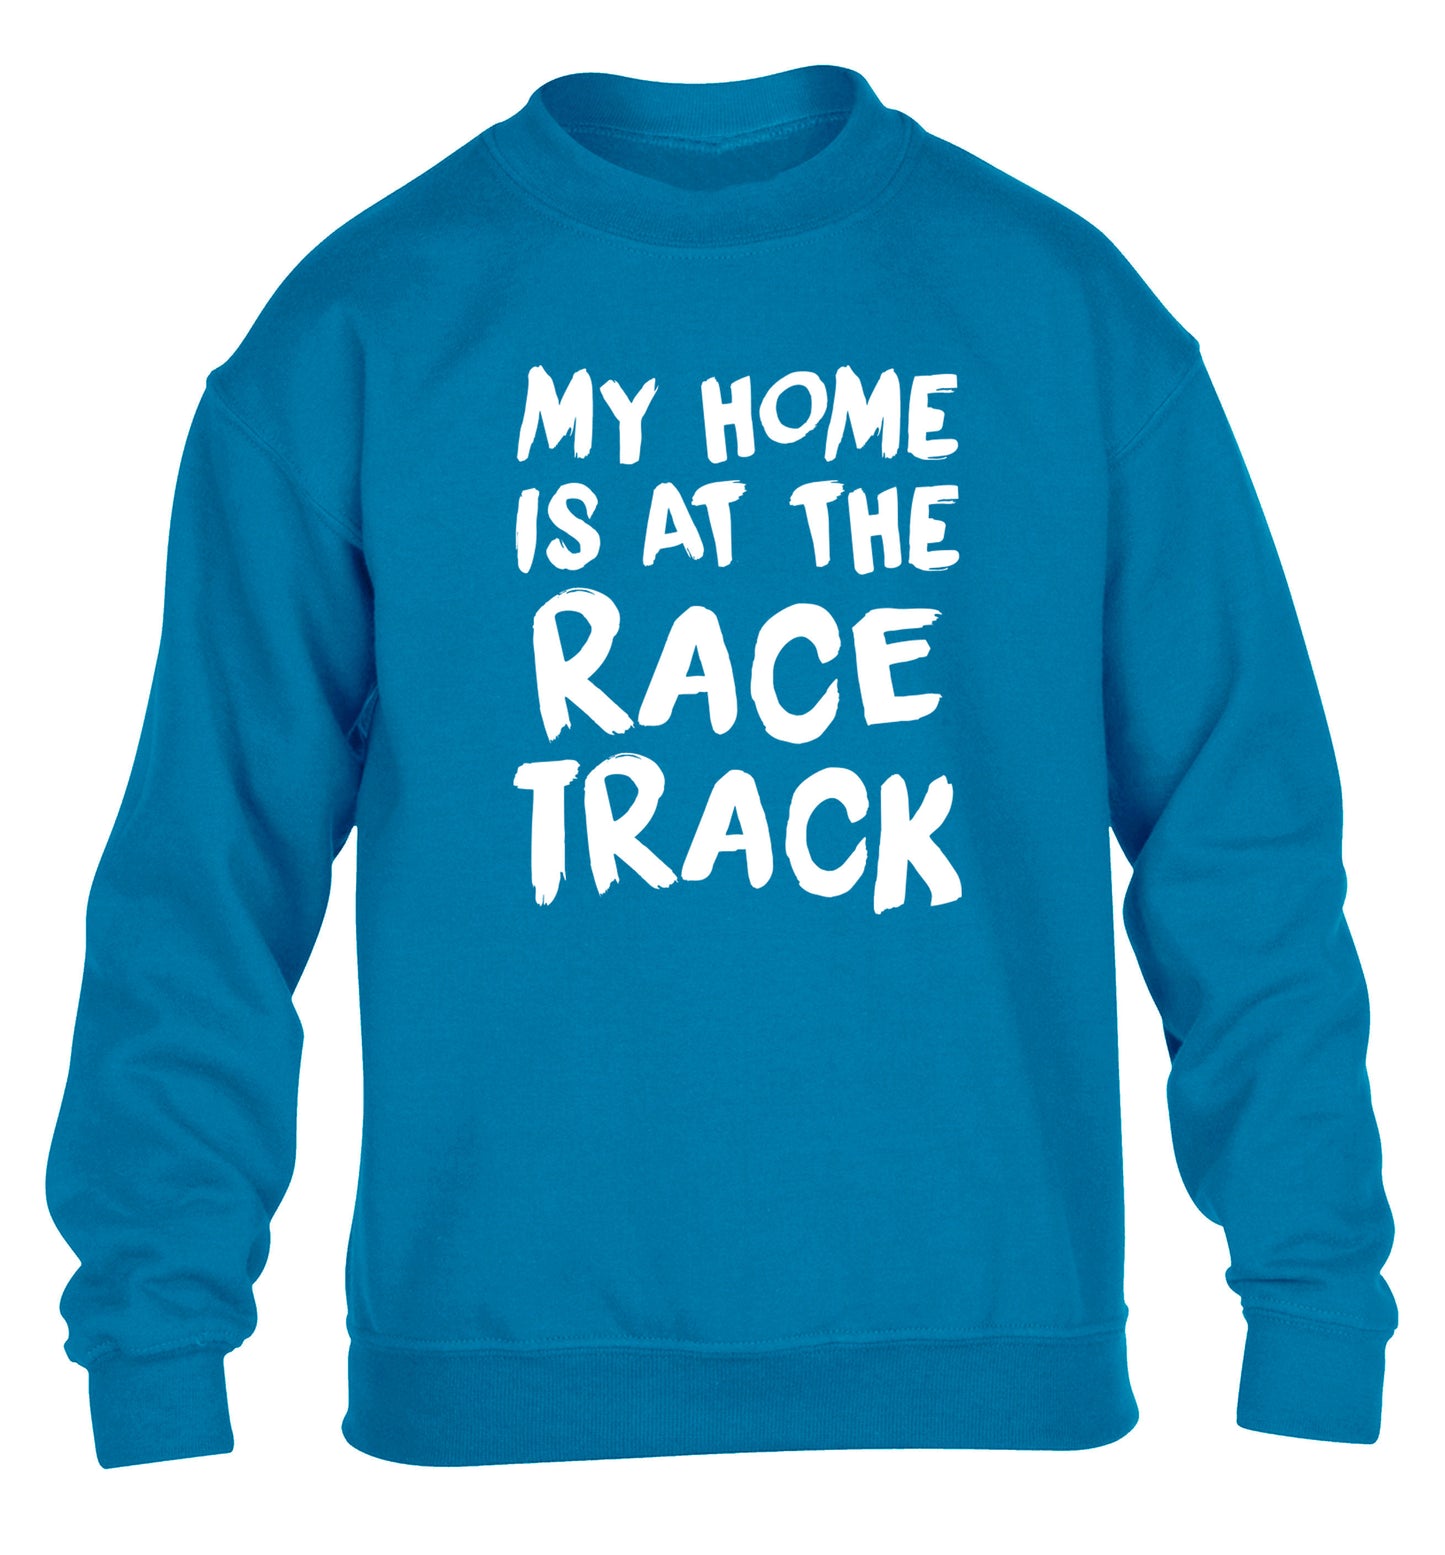 My home is at the race track children's blue sweater 12-14 Years